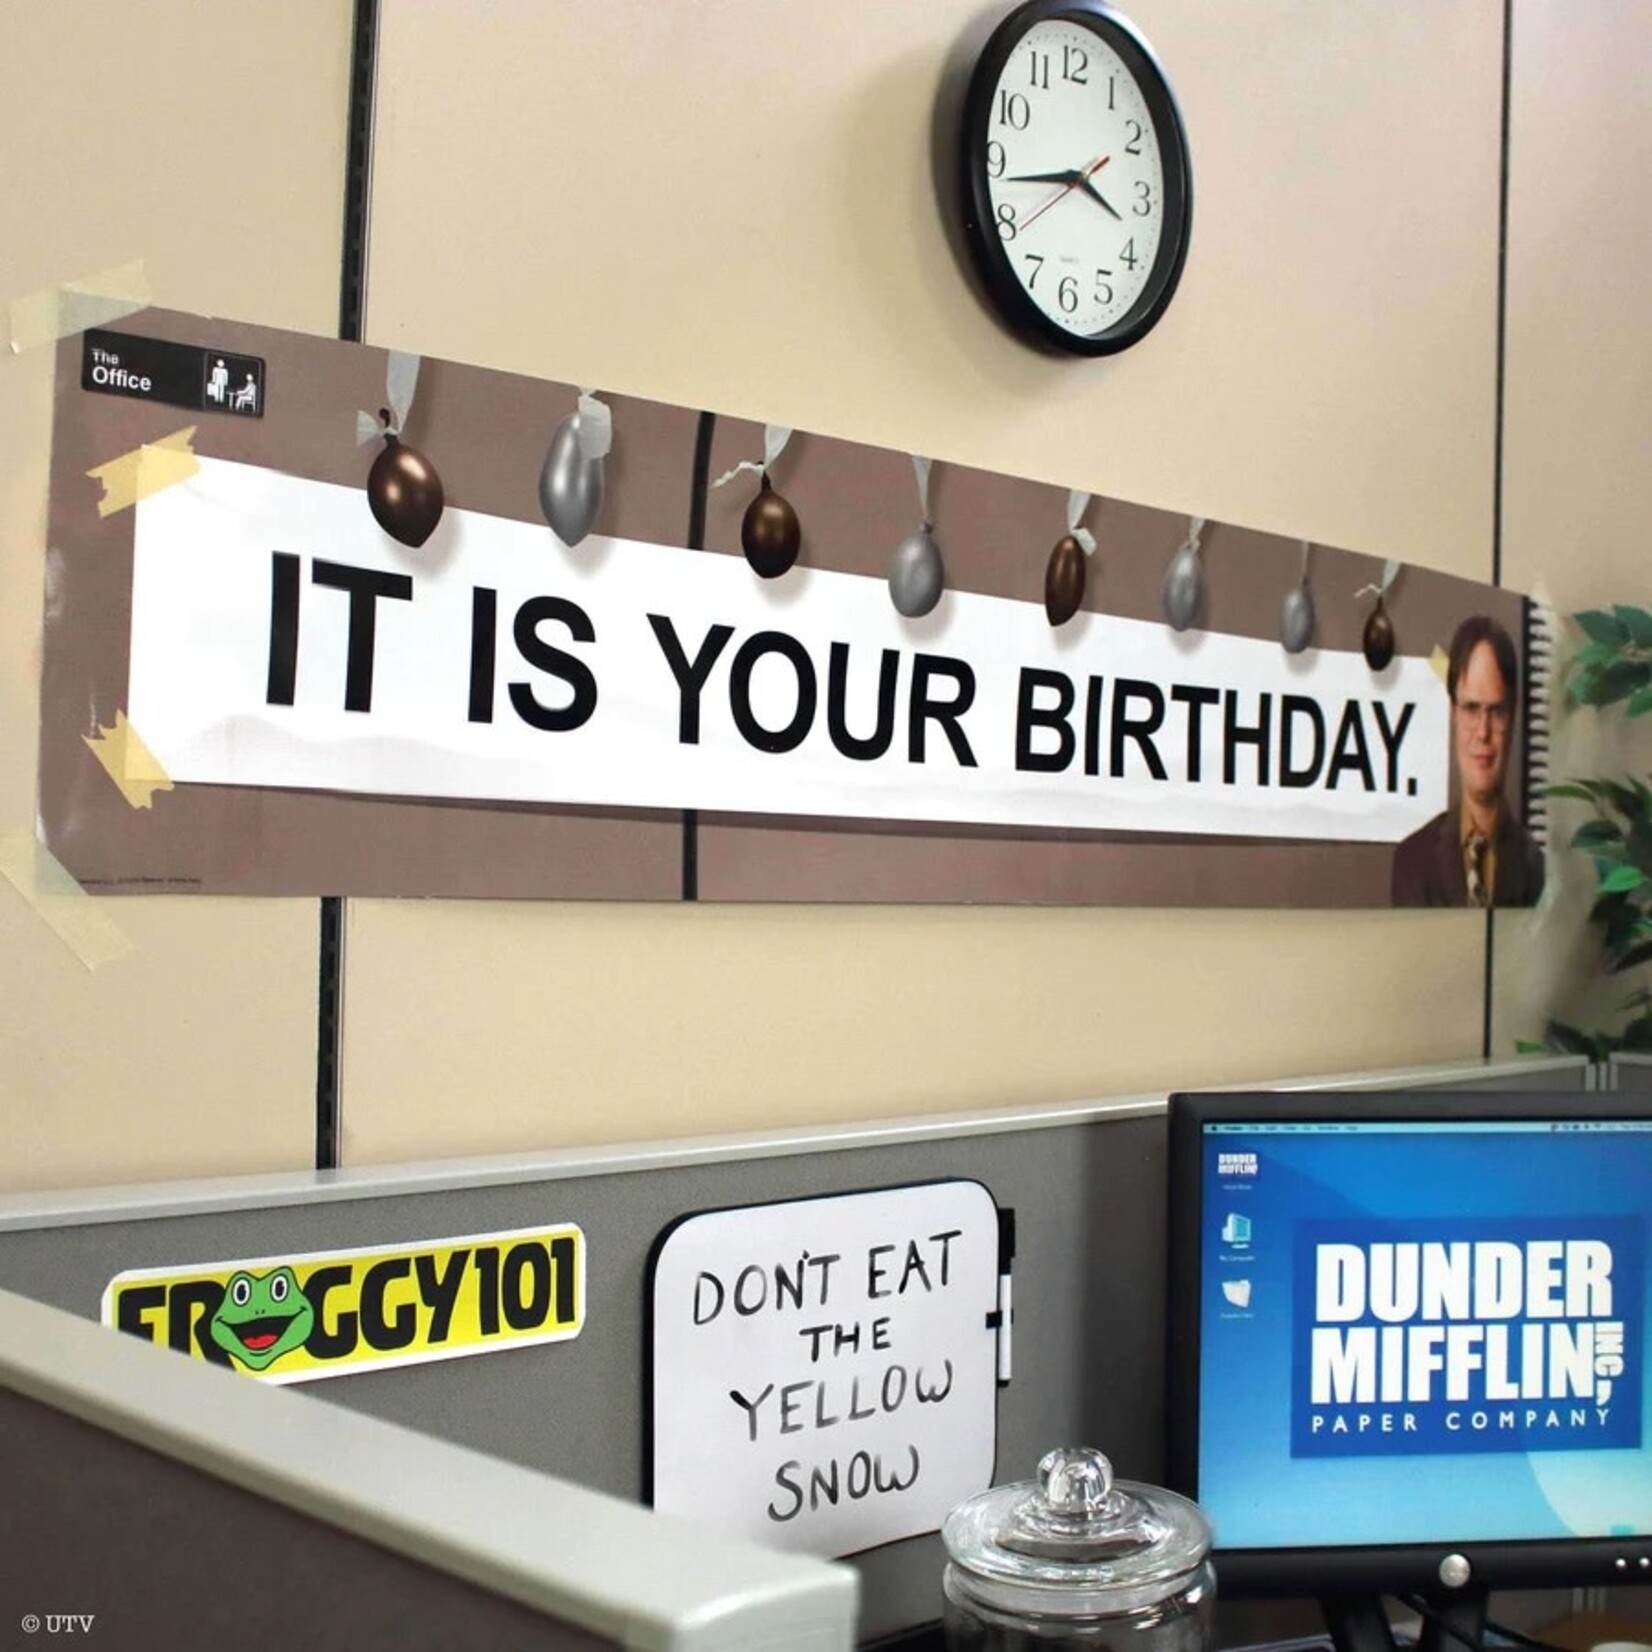 Prime Party The Office Birthday Banner - 1ct. (12" x 5')